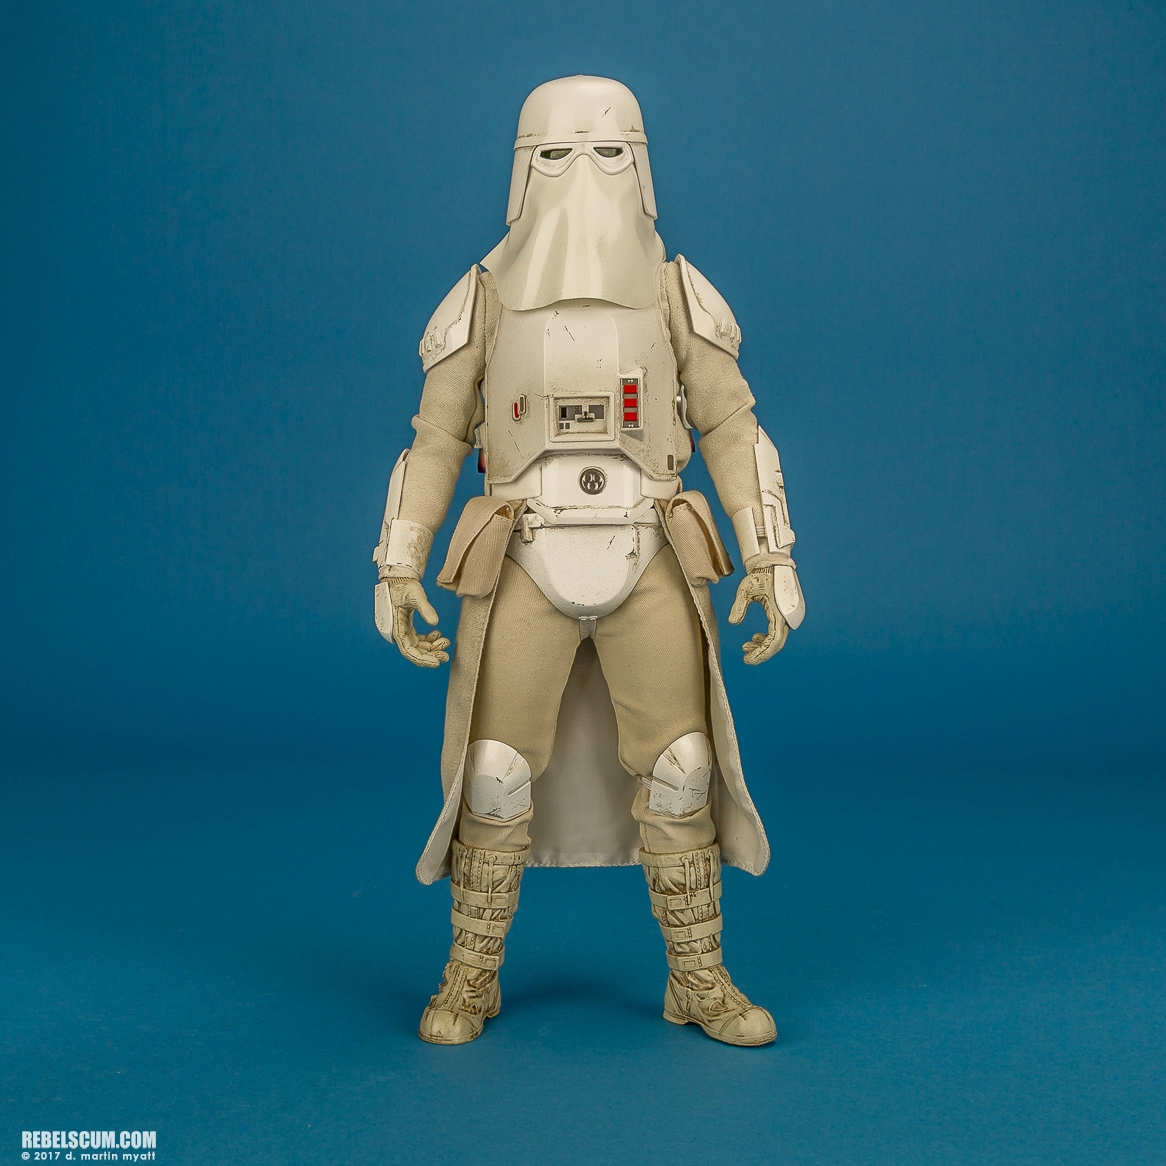 VGM25-Snowtroopers-Two-Pack-Hot-Toys-005.jpg